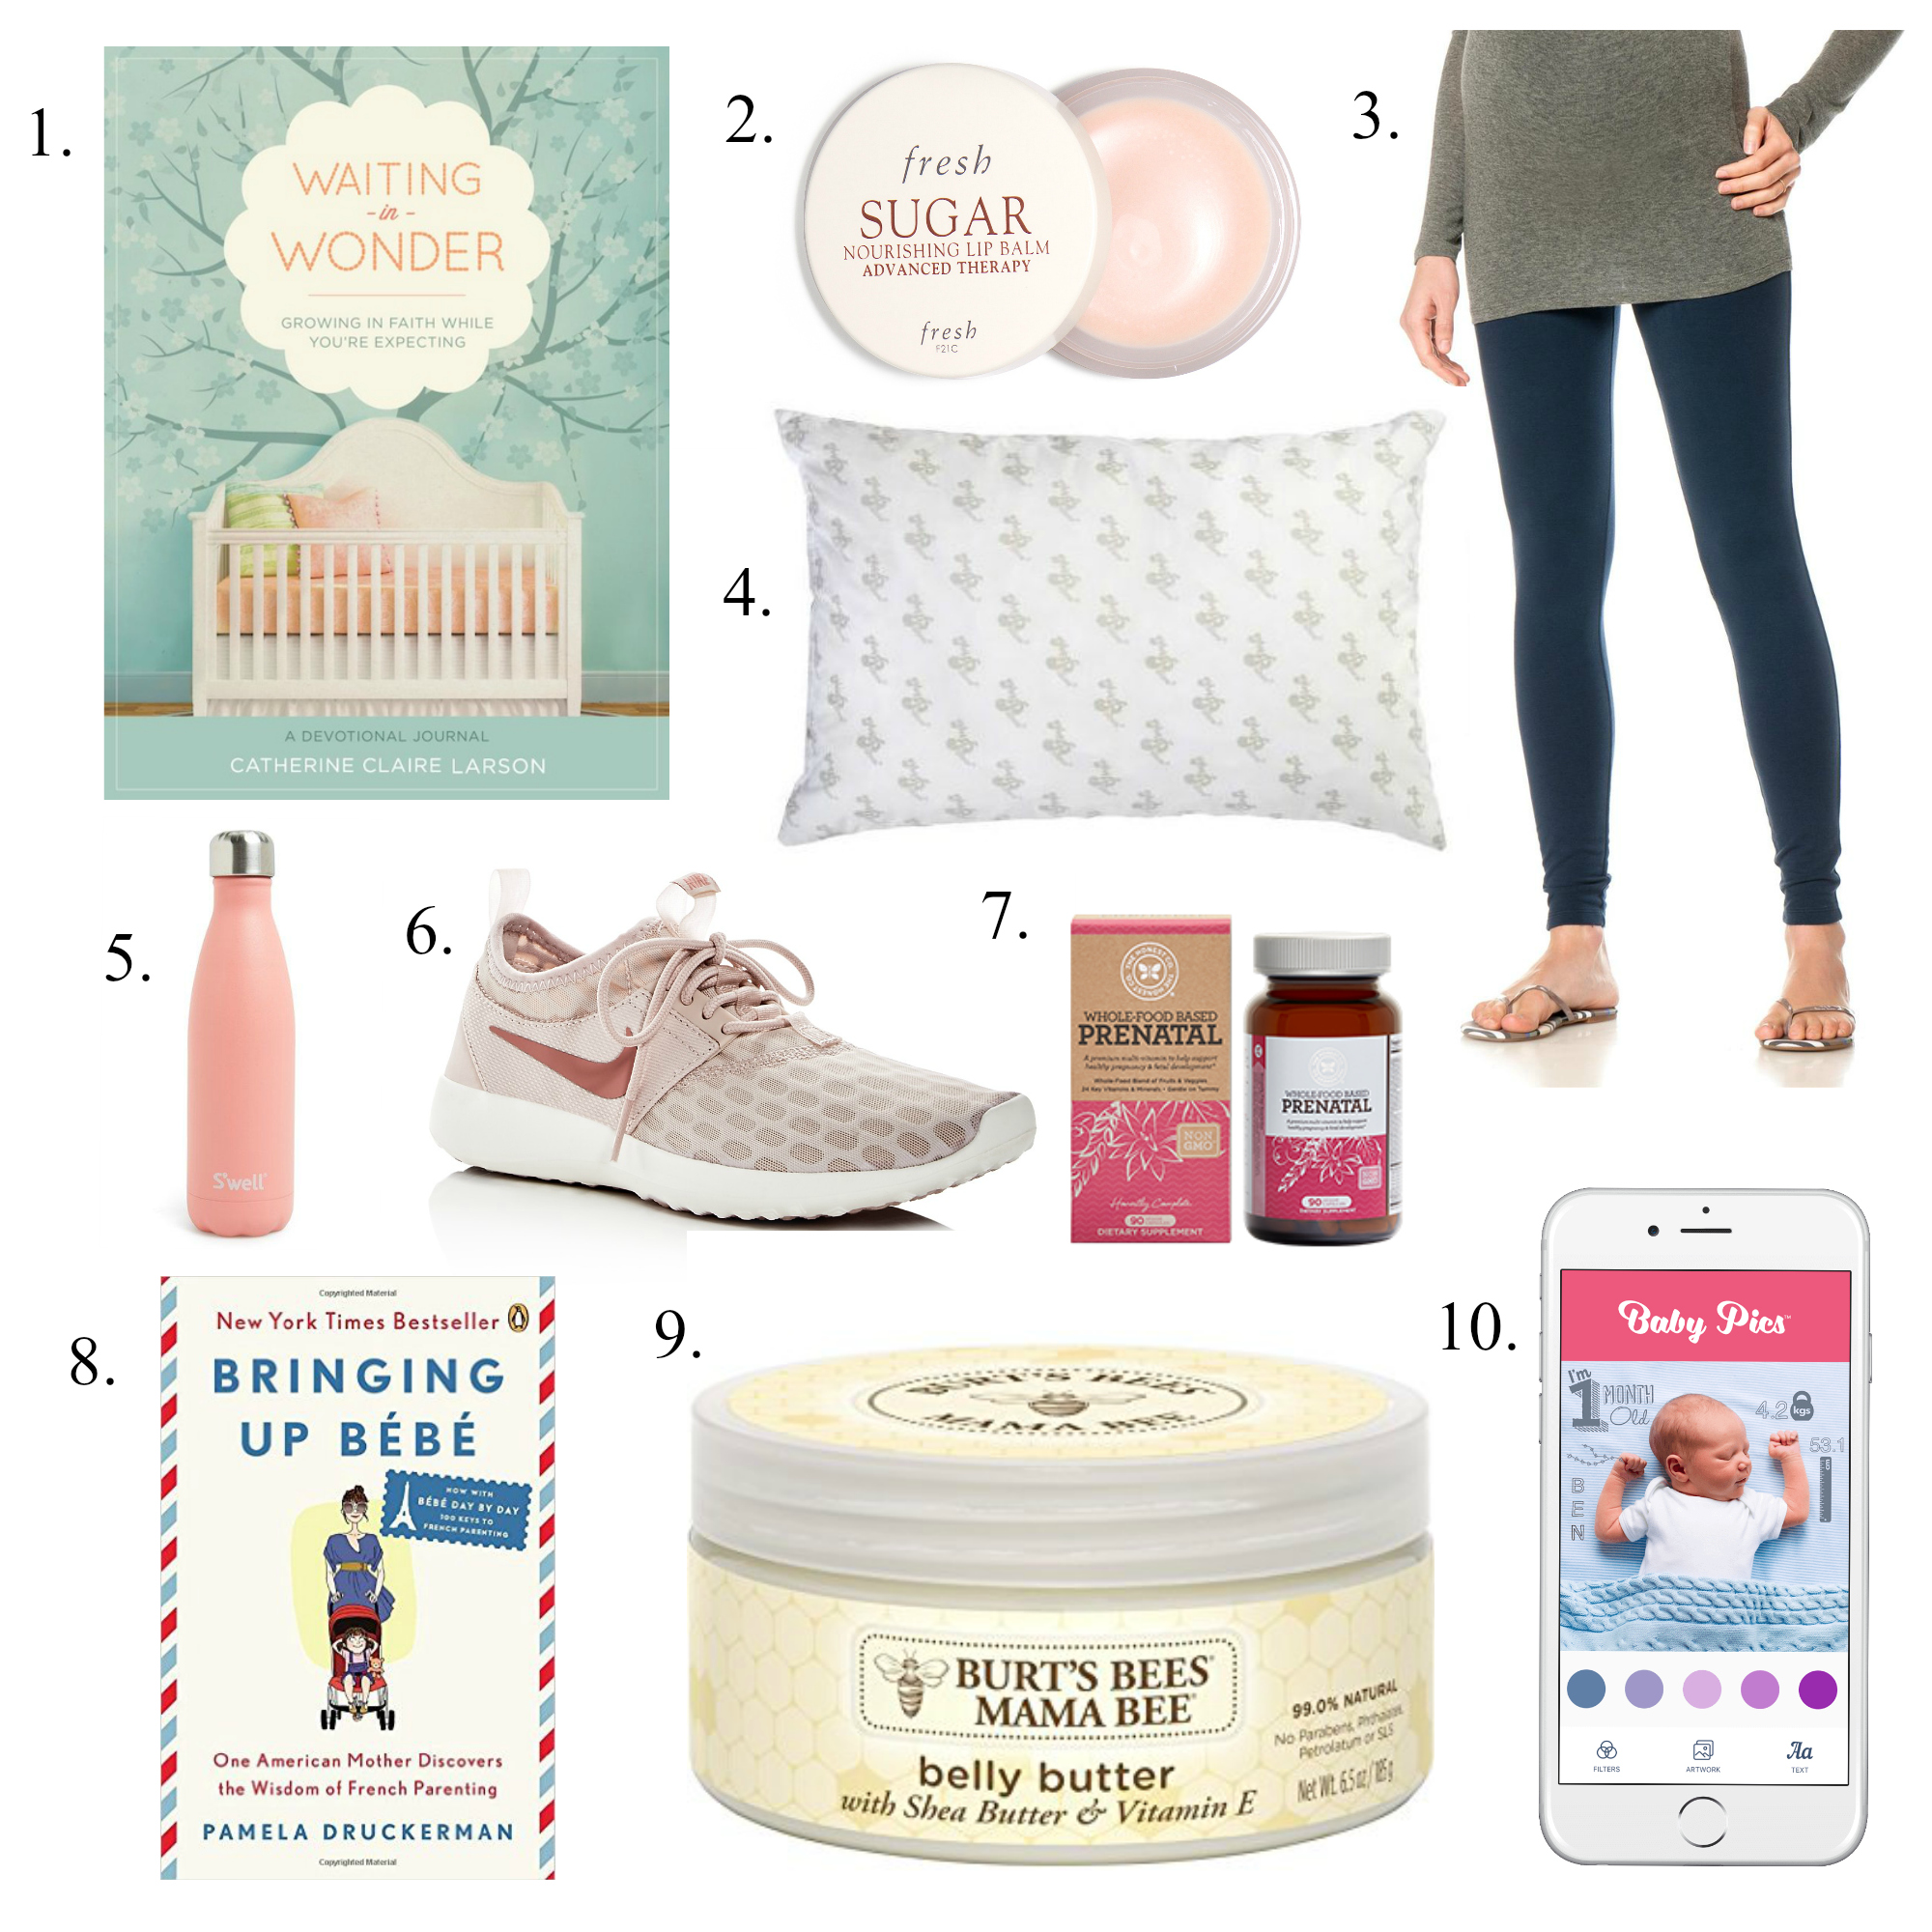 http://homesweethunter.com/wp-content/uploads/2017/11/10-Must-Have-Pregnancy-Items.jpg